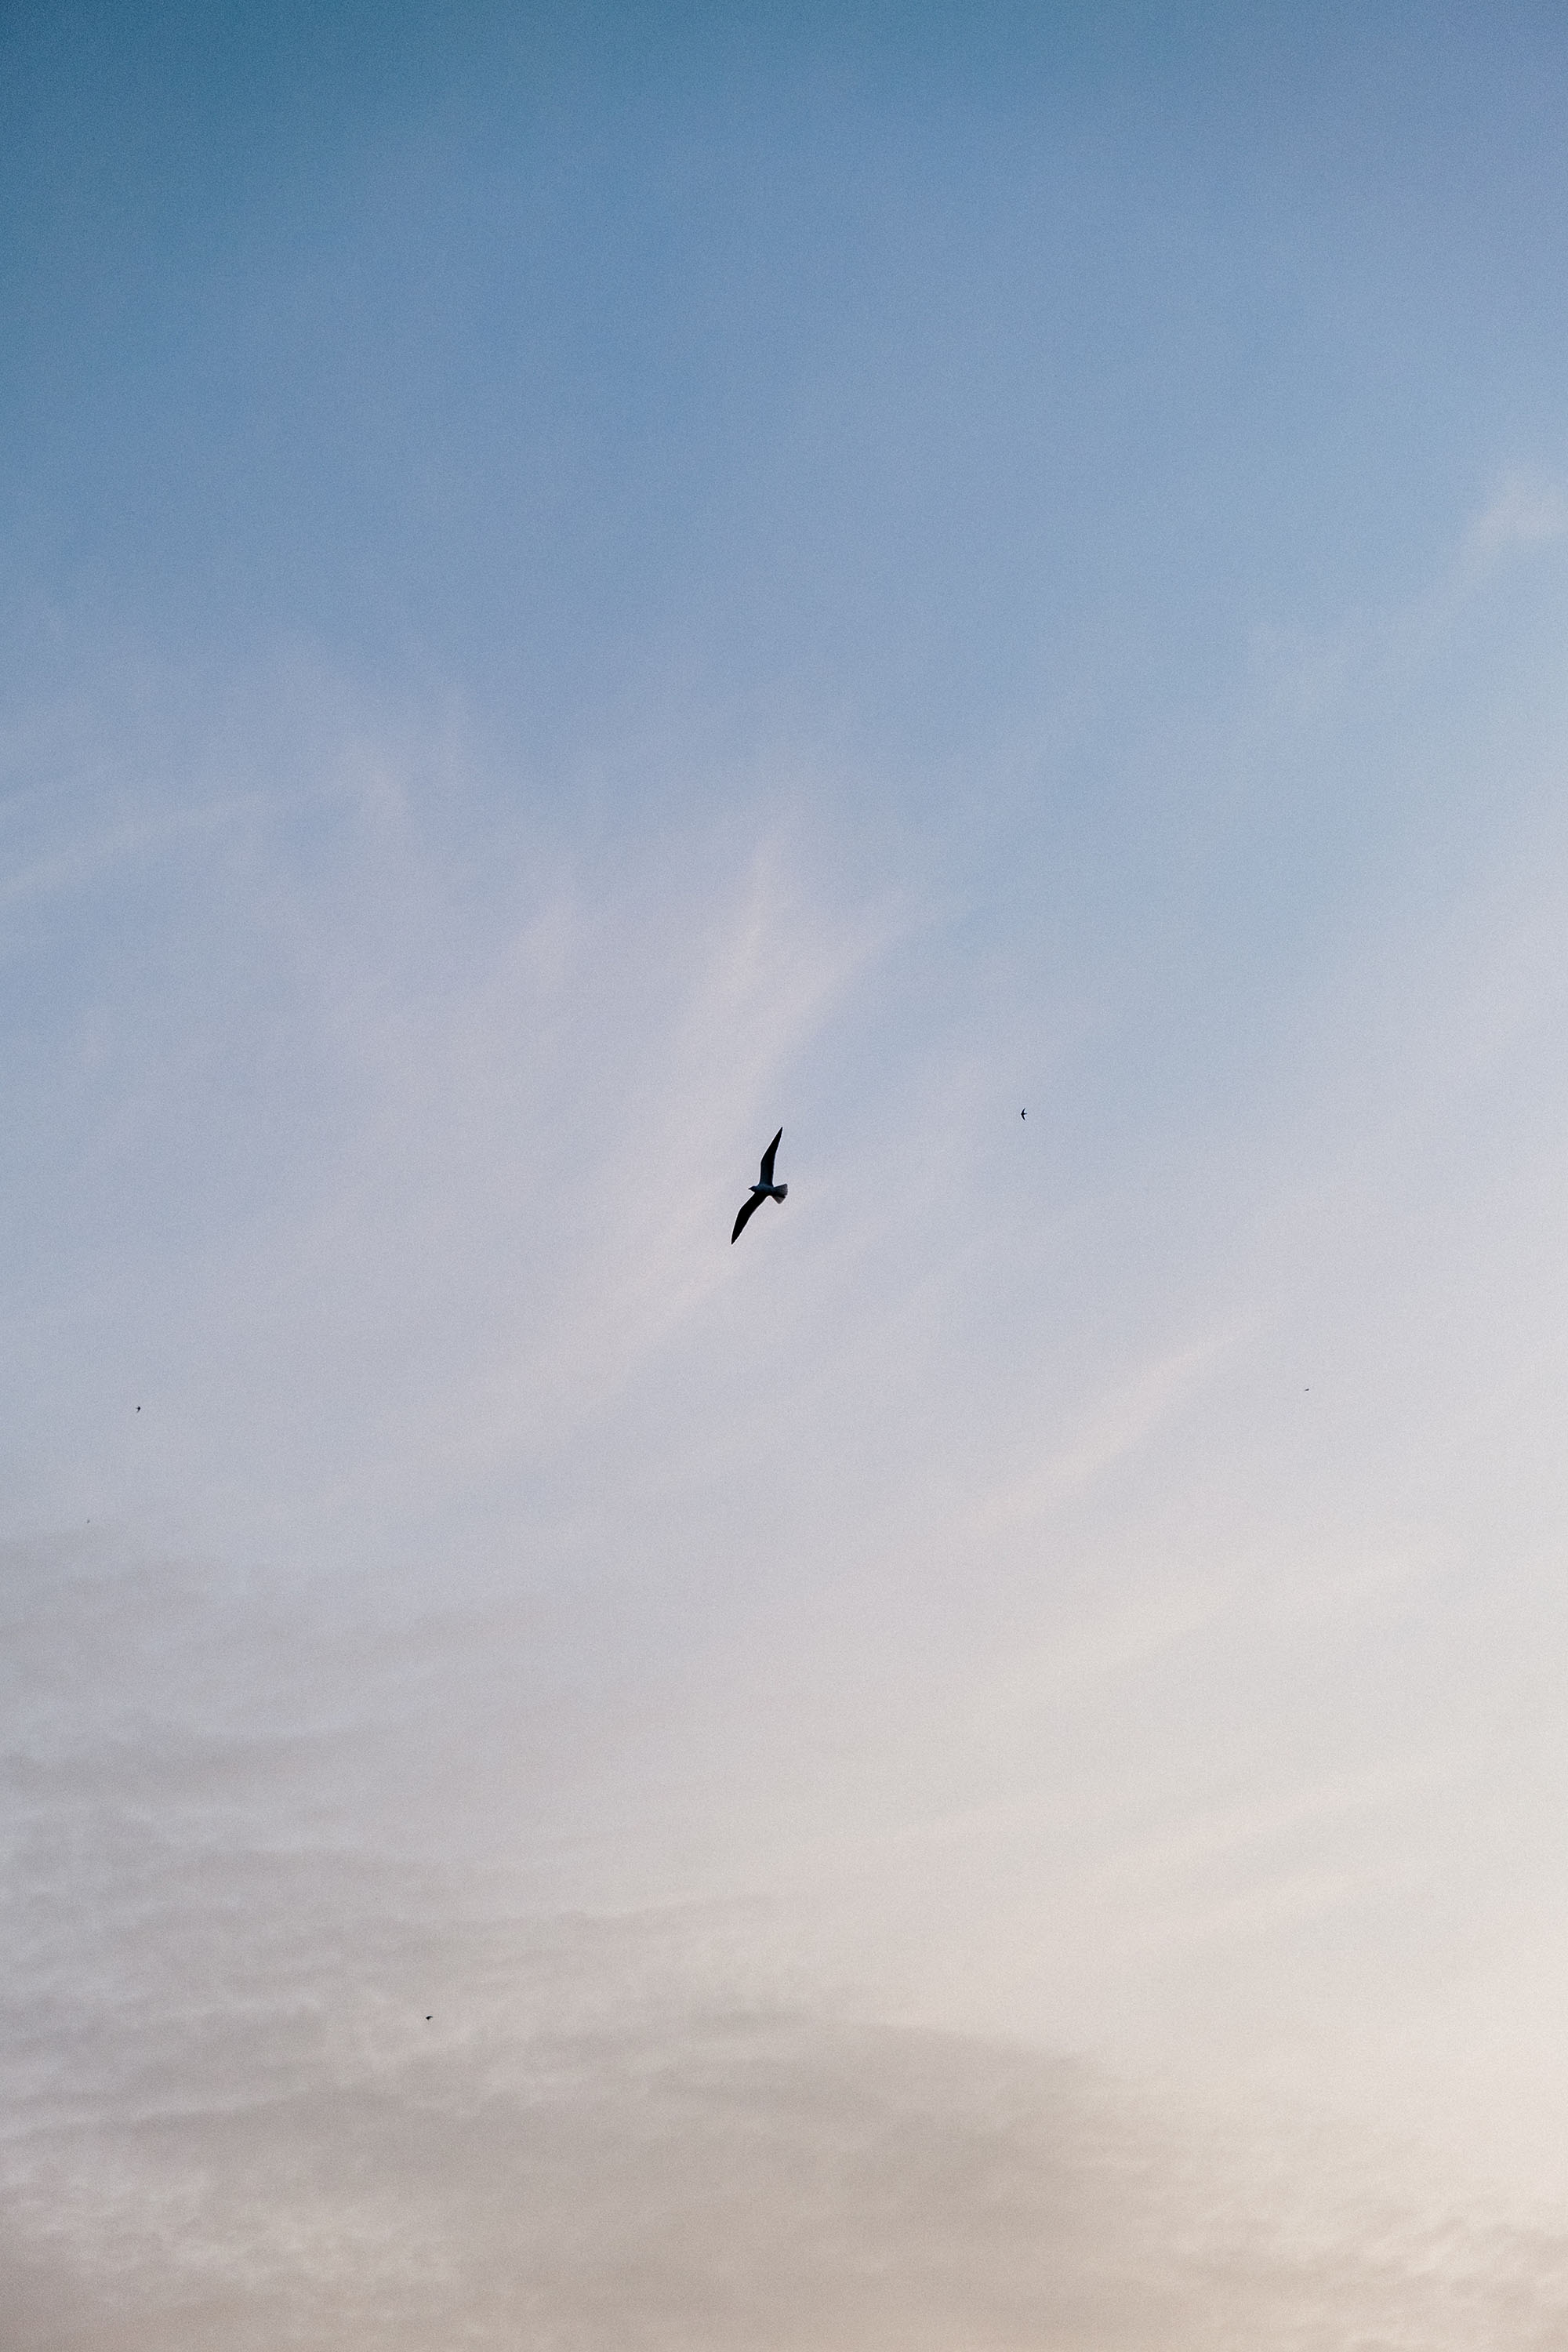 This is a serene image of a bird flying against a backdrop of soft, wispy clouds tinged with the gentle hues of sunset.